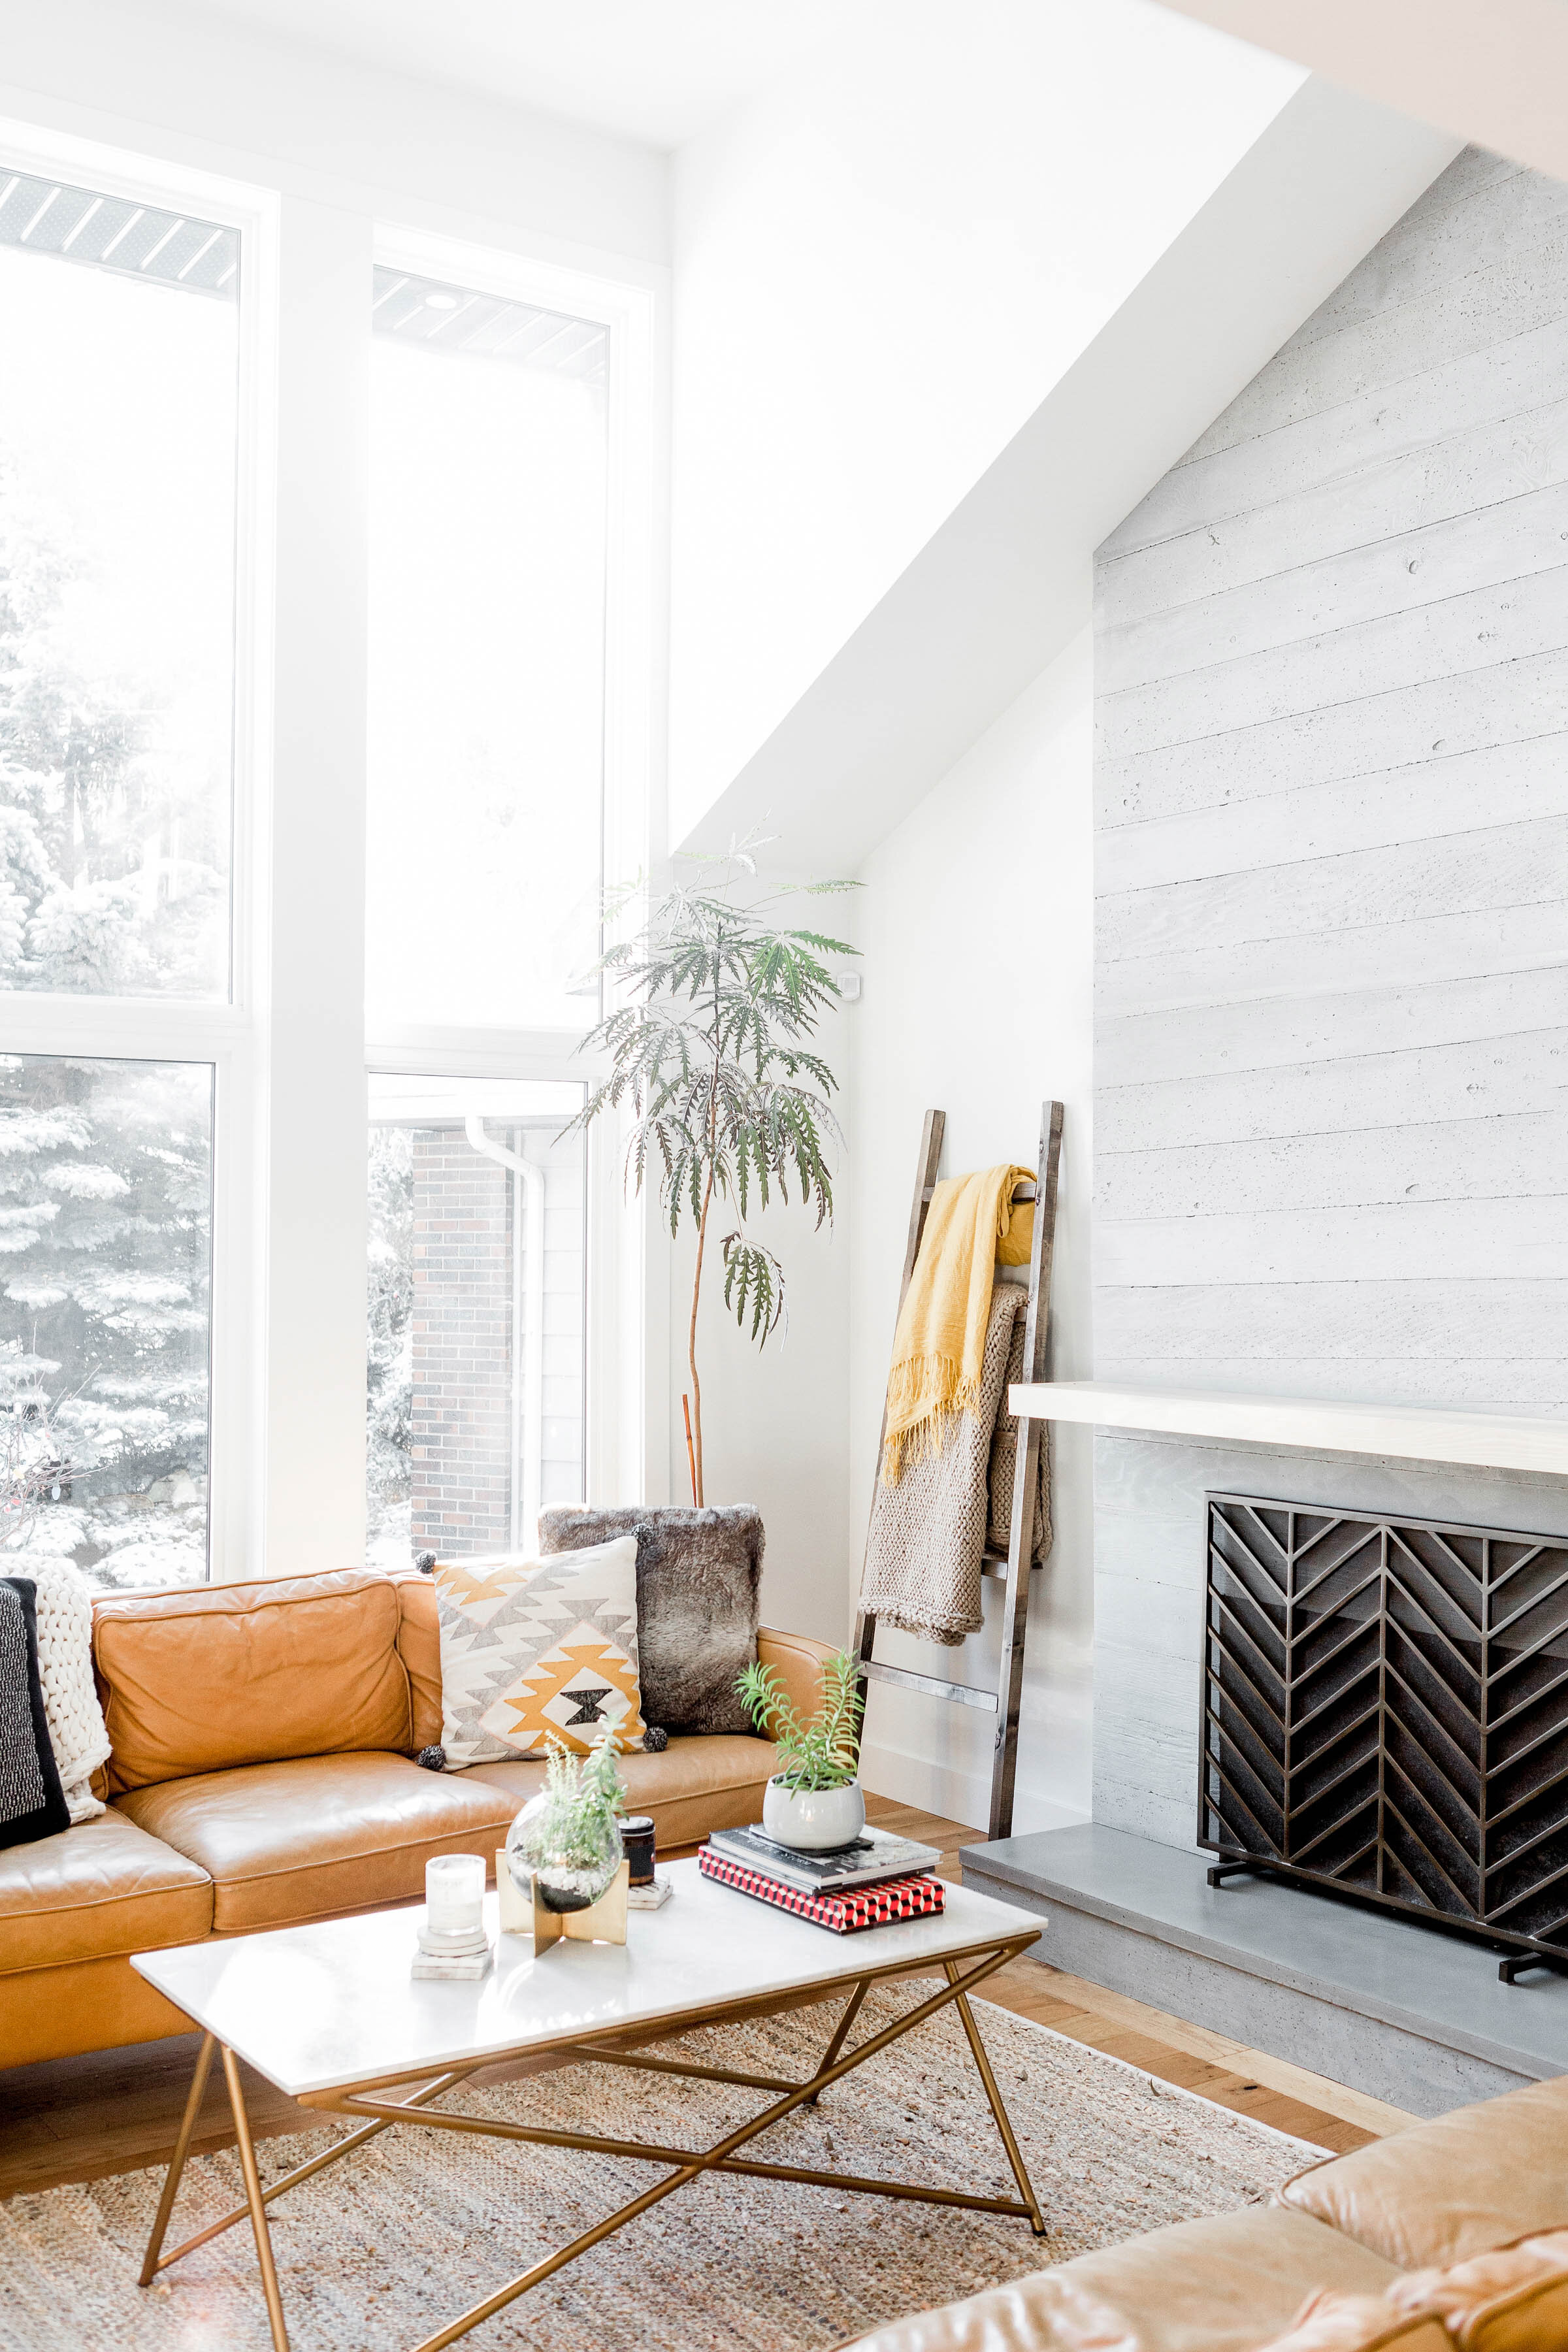 How to Transform Your Space Into A Cozy Home This Winter